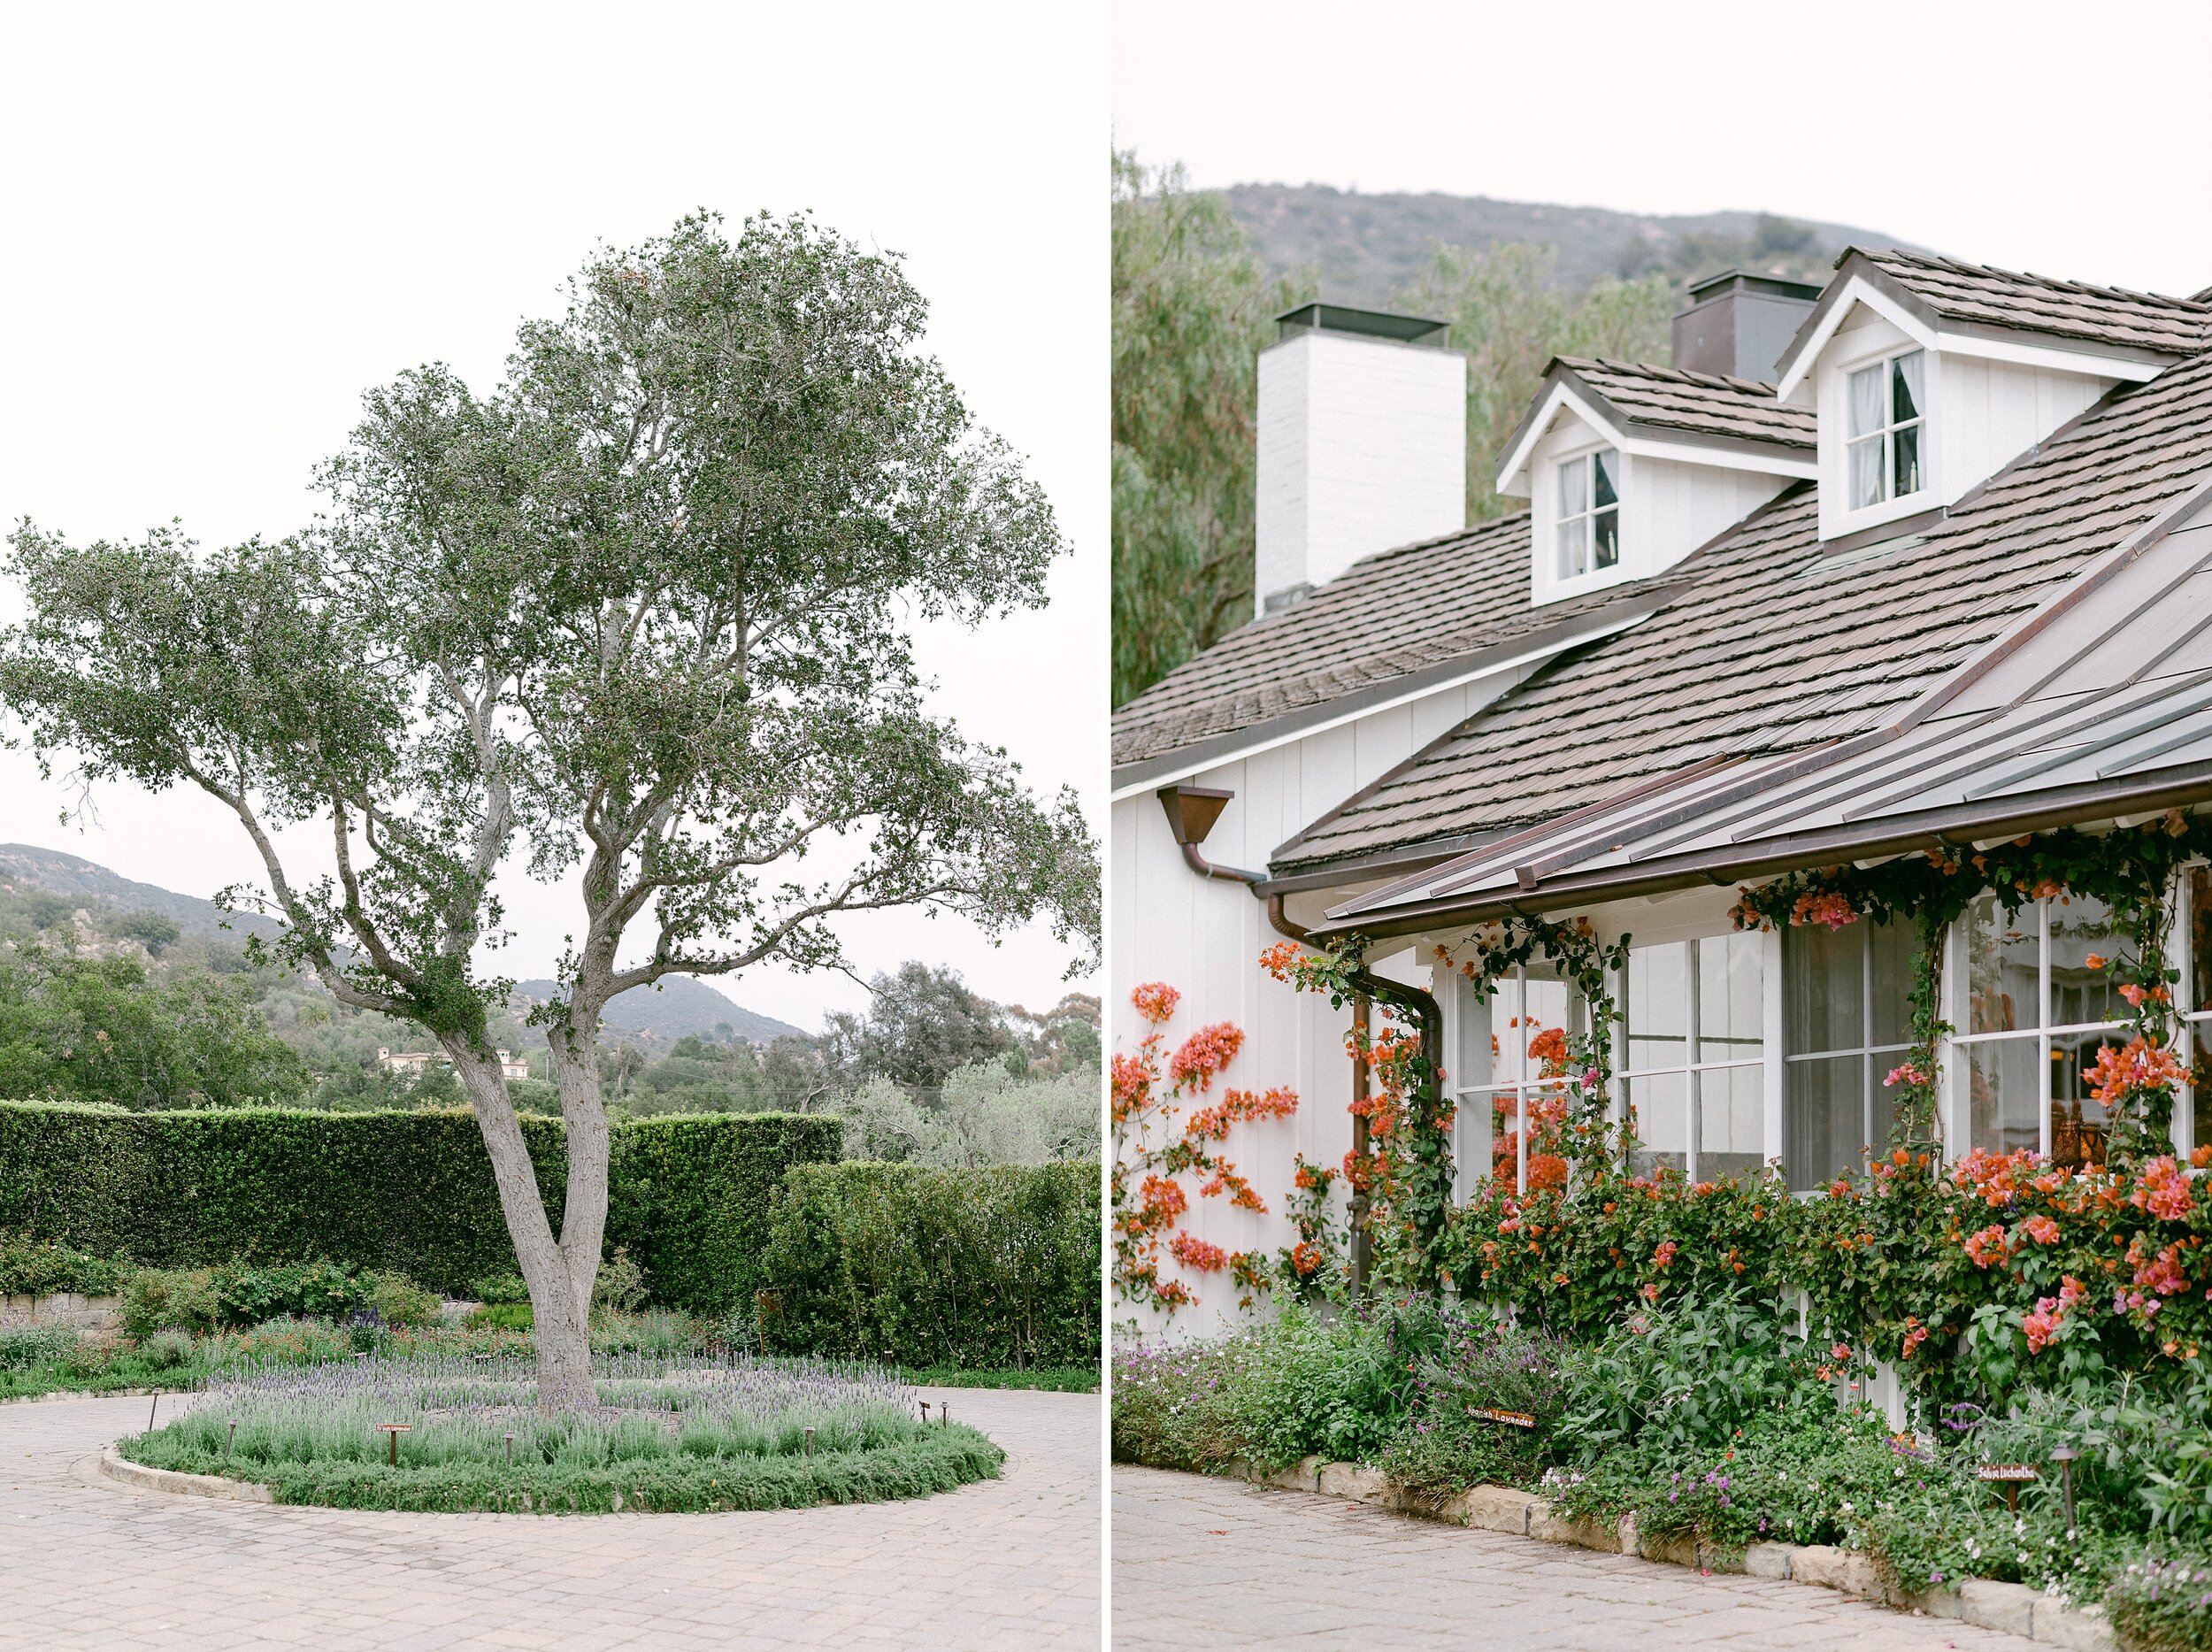 Image on the left shows a all olive tree in center of cobblestone driveway.  Image on the right shows a white building with dormer windows surrounded by bougainvillea.  This scenery sets the tone for a dreamy San Ysidro Ranch wedding